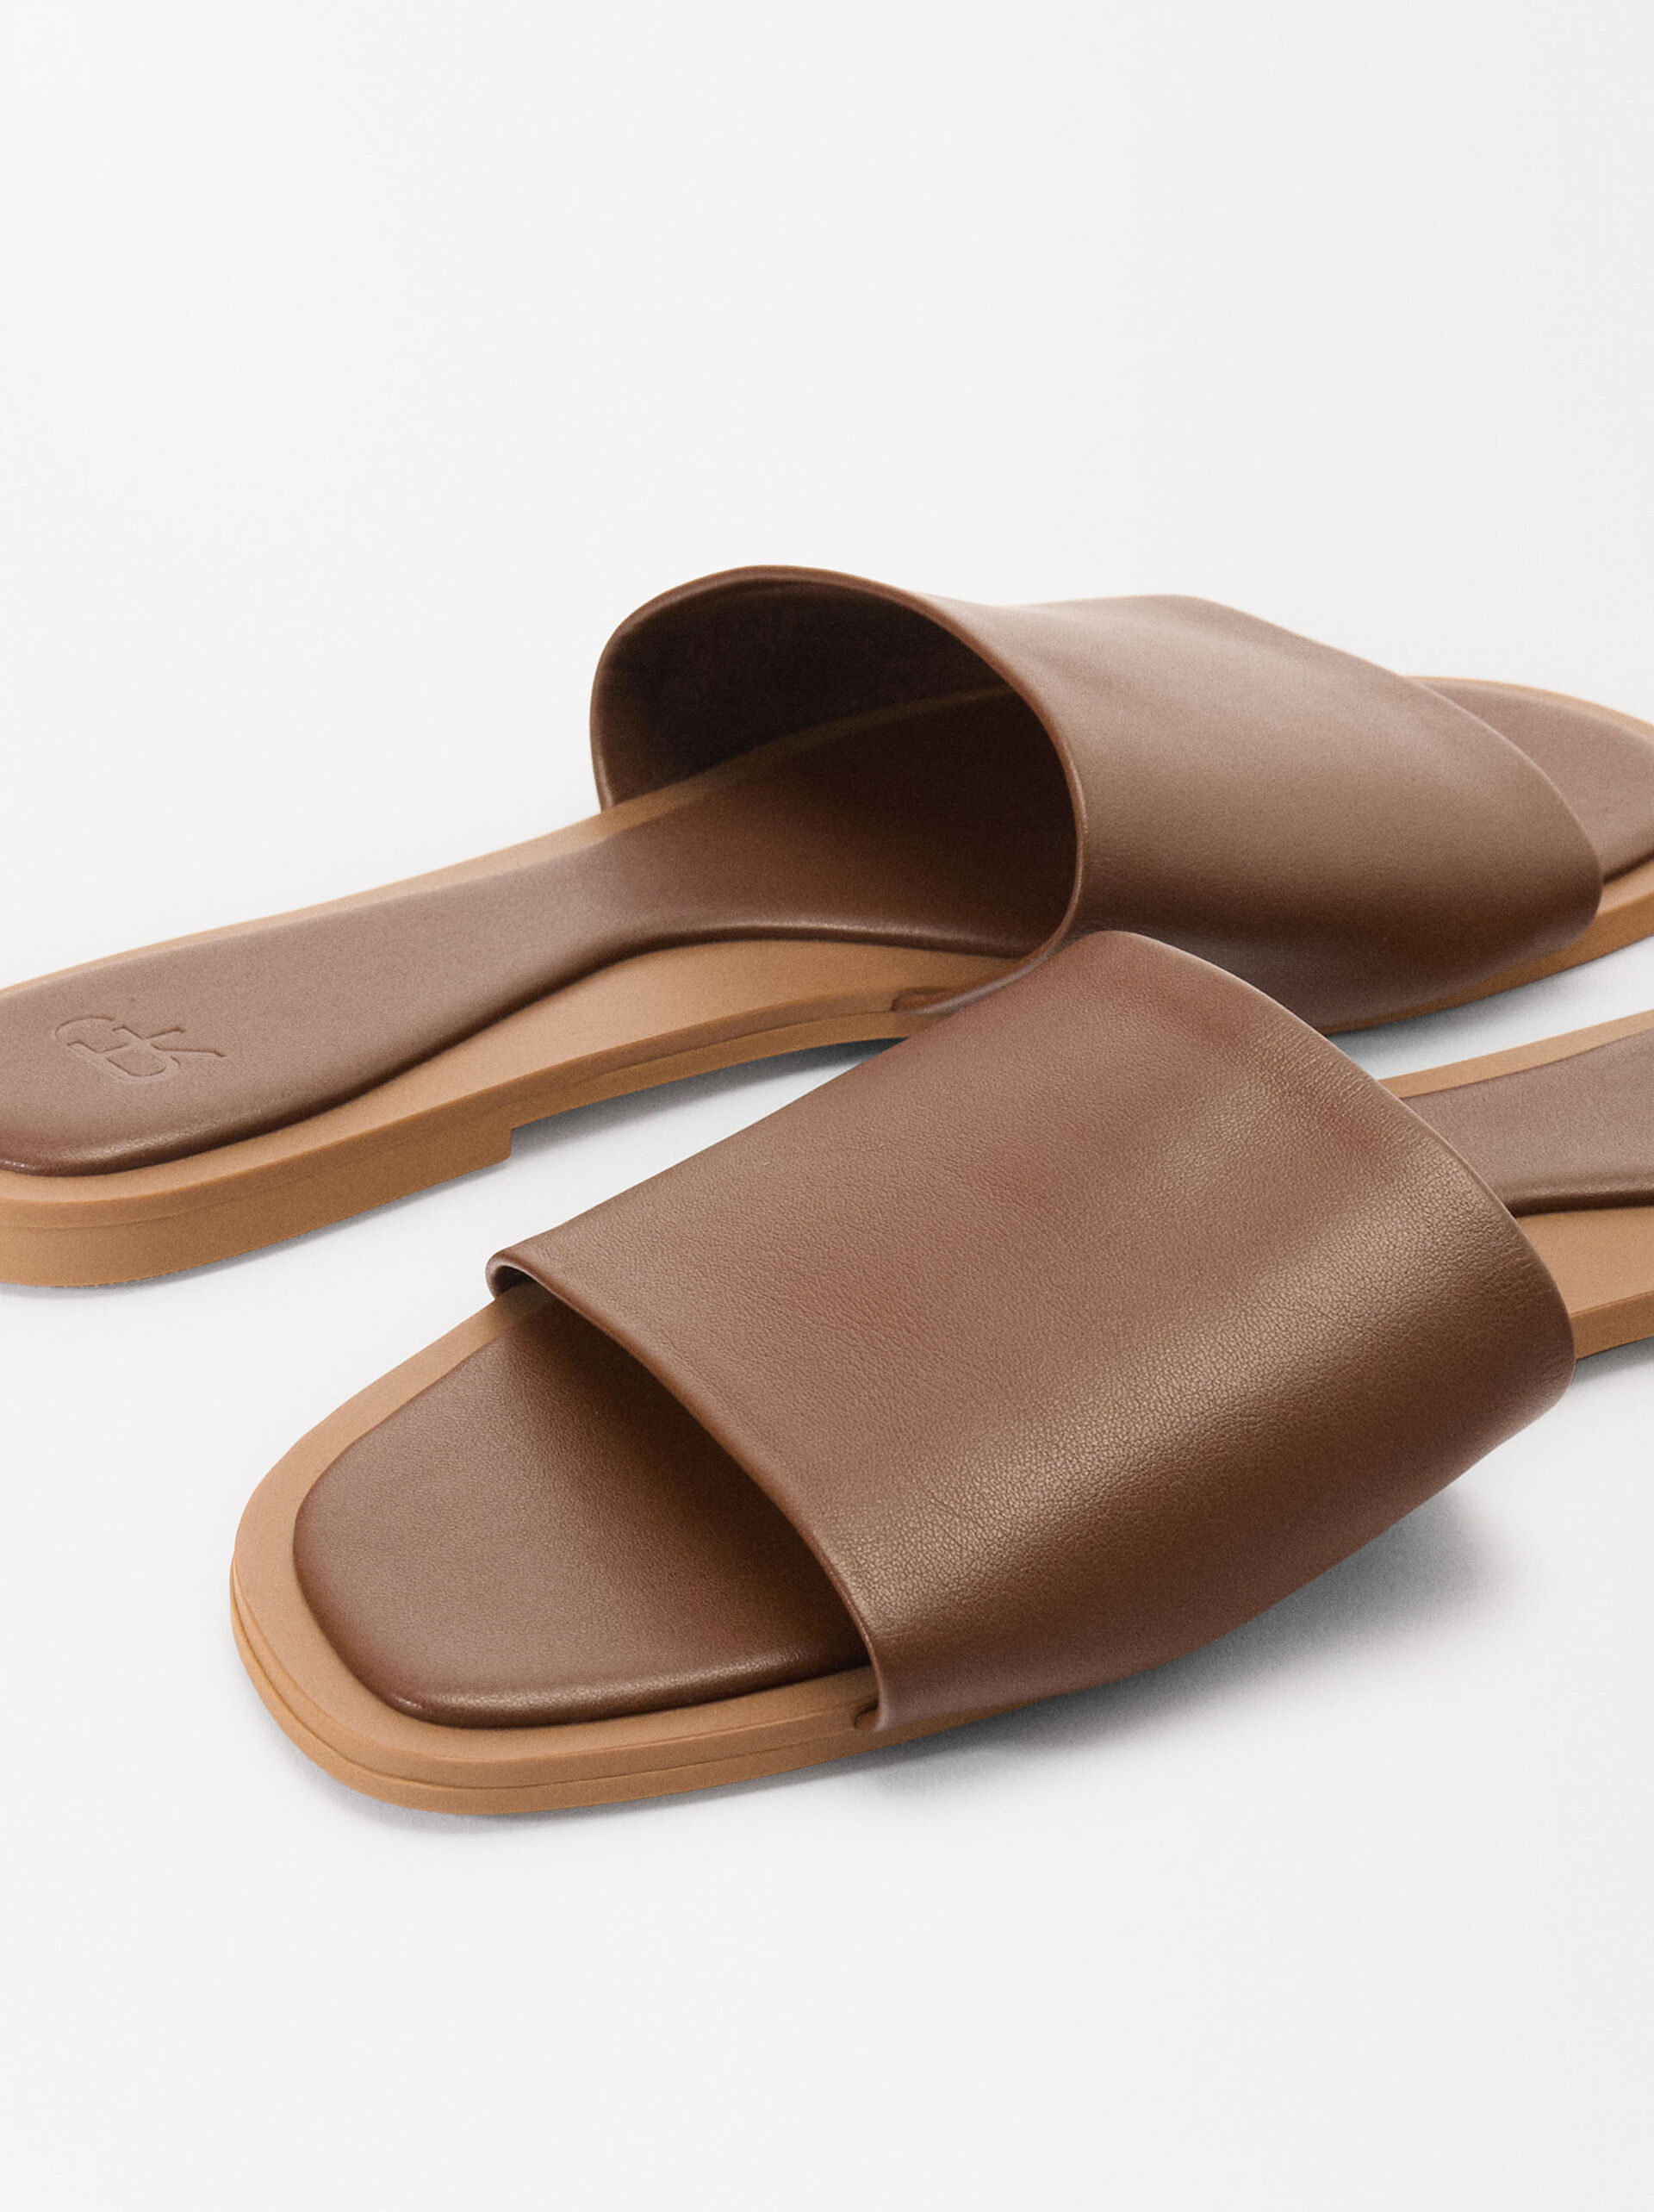 Napa Leather Sandals image number 5.0